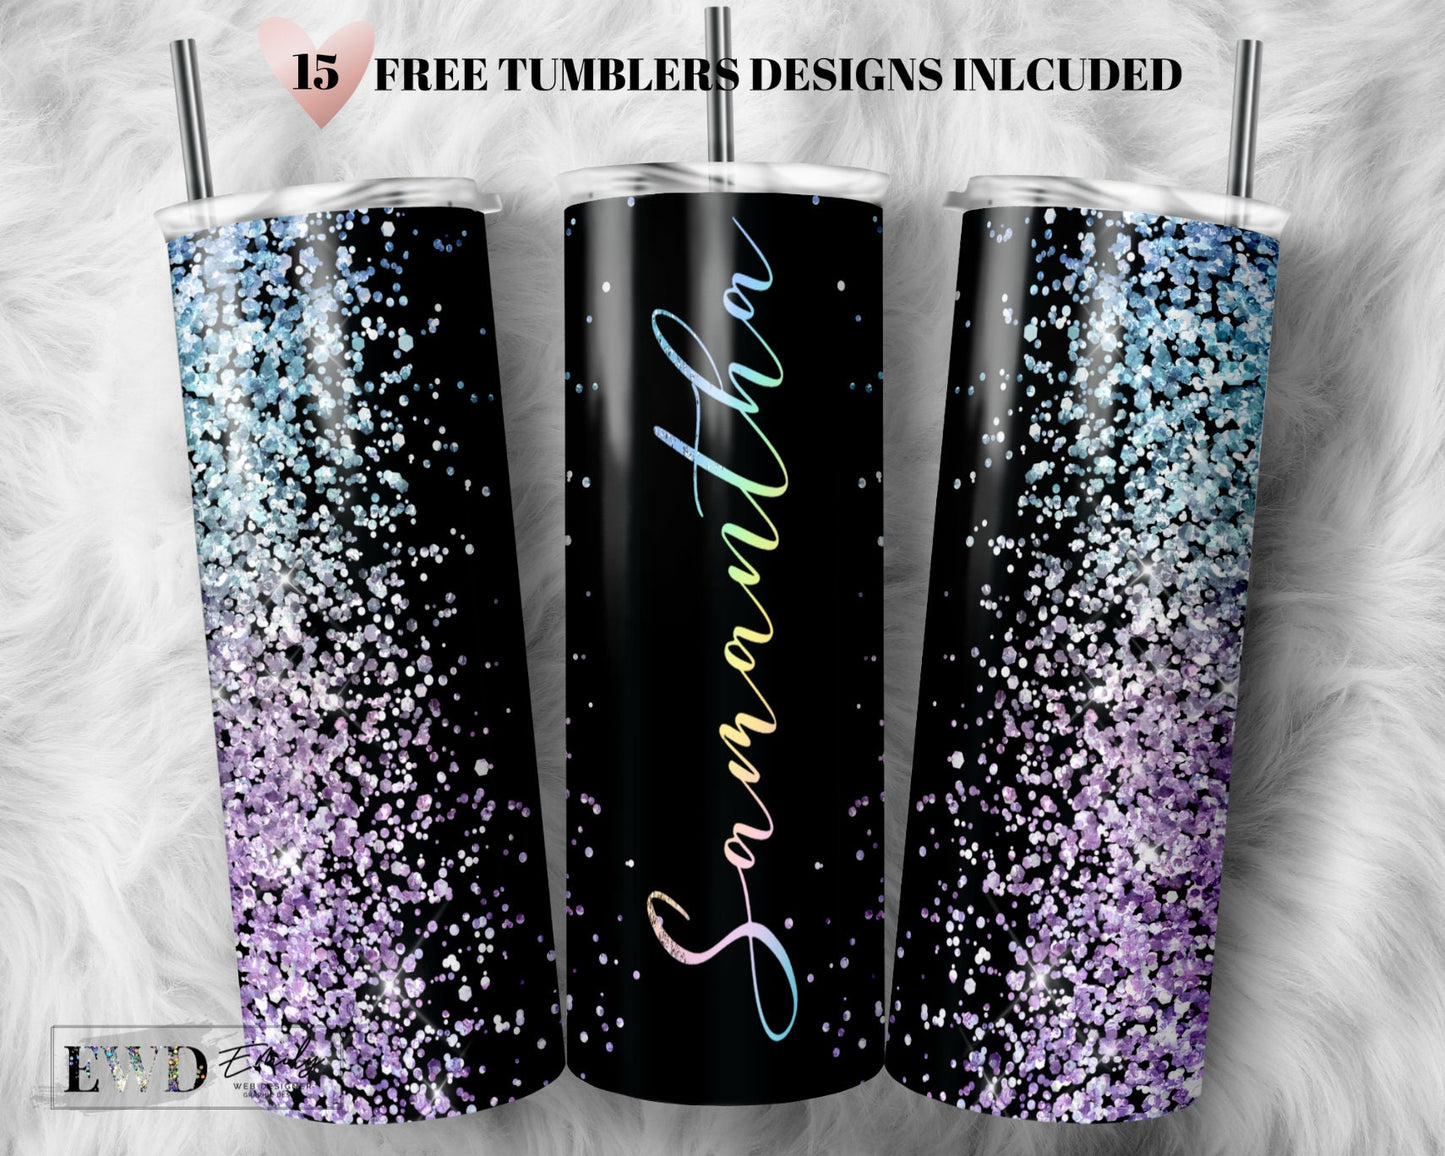 Rainbow Glitter Print Add Your Own Text Name Sublimation Tumbler Designs - 20oz Skinny Tumbler Wraps Templates - PNG